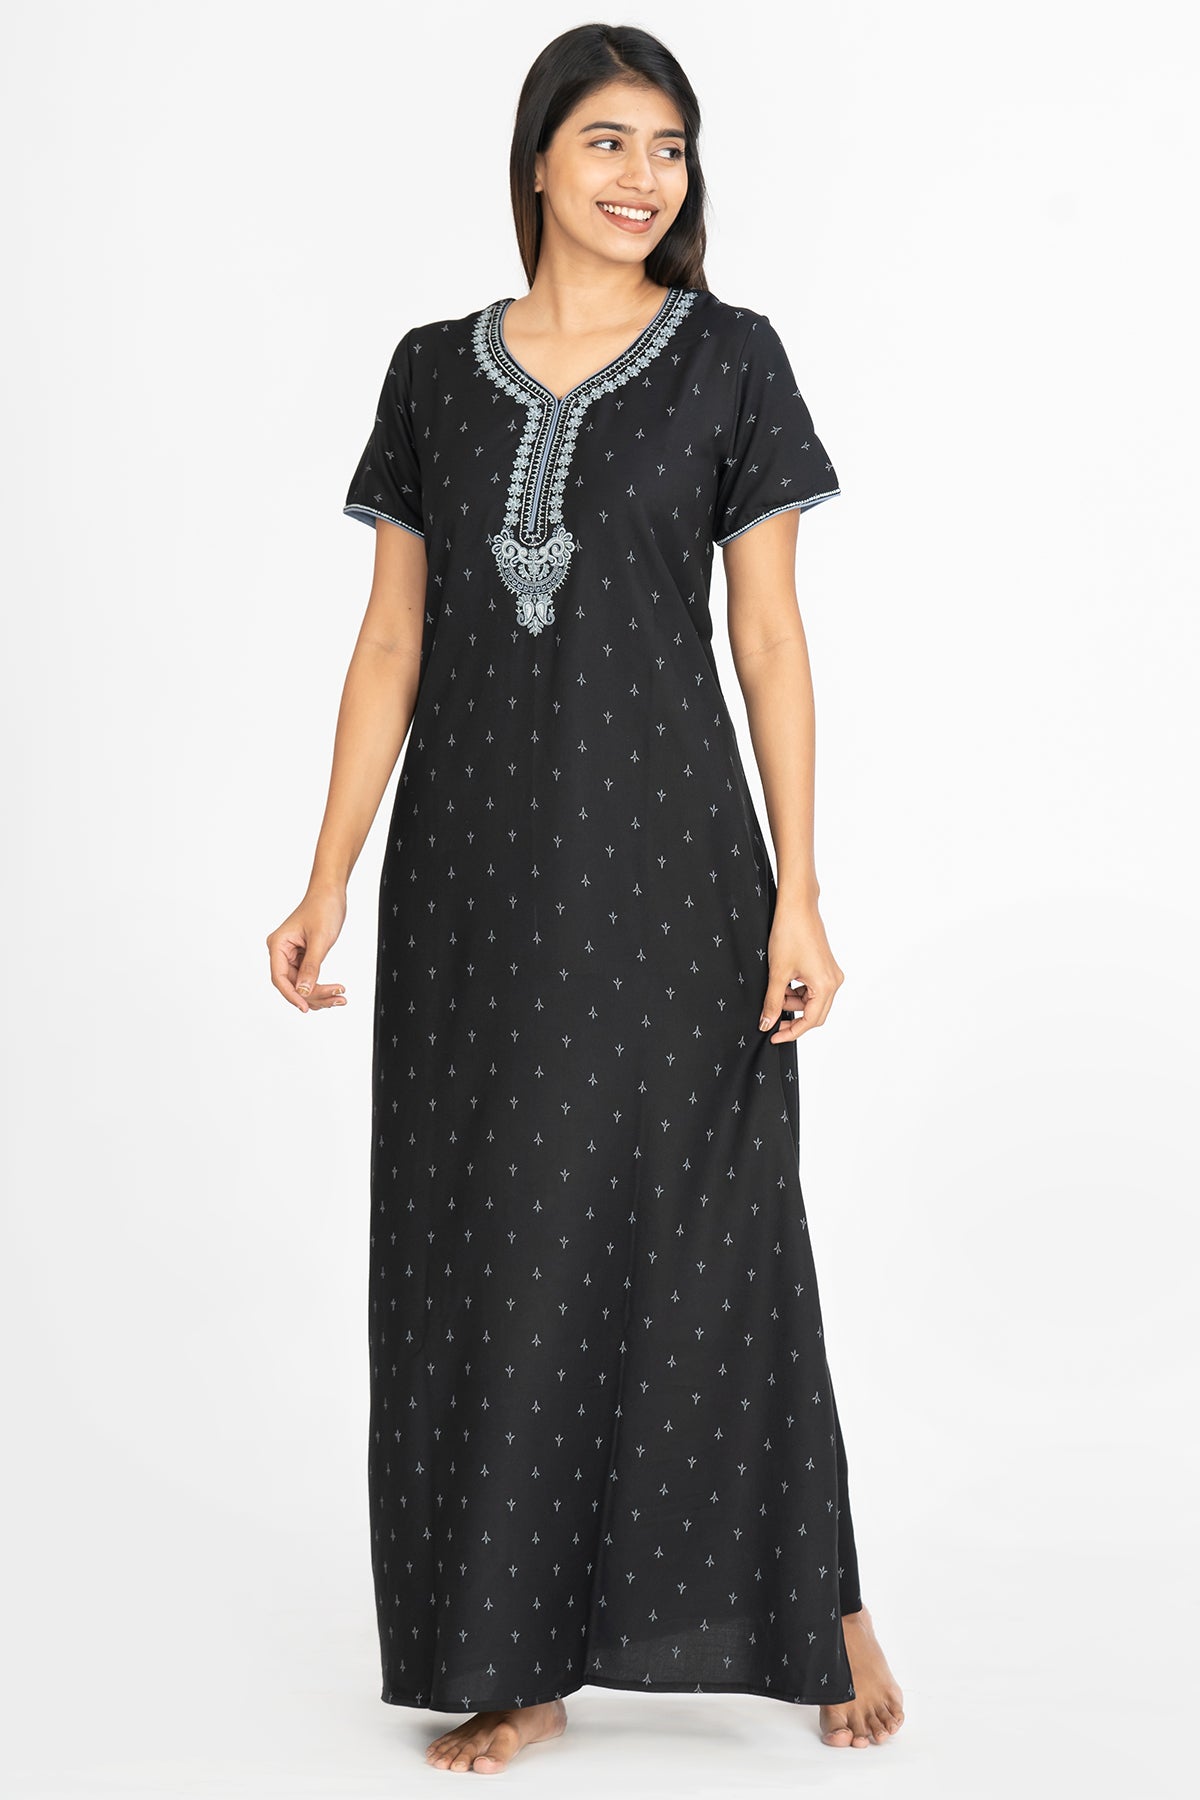 All Over Geometric Print With Contrast Floral Embroidered Yoke Nighty -  Black